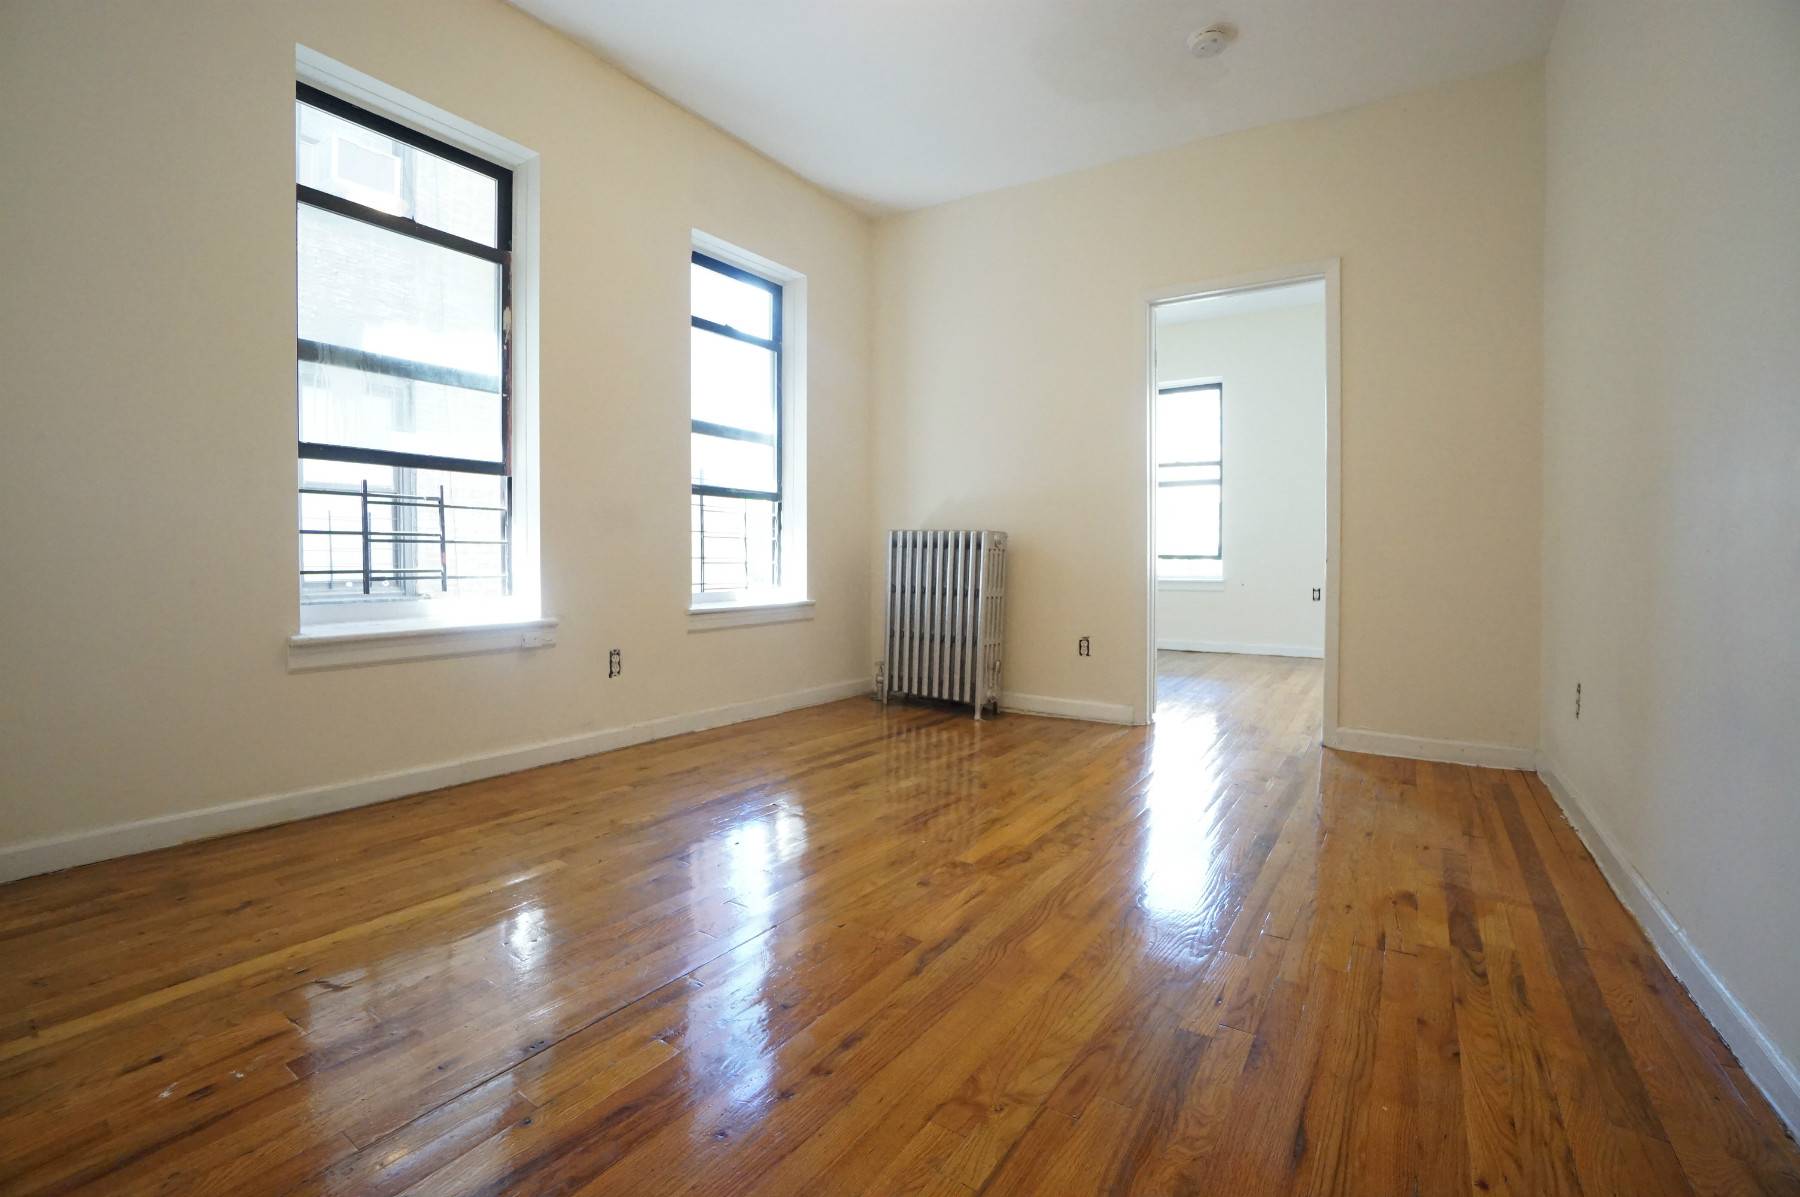 Beautiful 2 bedroom 1 bathroom apartment145th St amp ; 7th AveEasy Access to ABCD trains at 145th Street Laundromats and luxury restaurants nearbyClose by to PS 194 and nursery schoolsNO ...